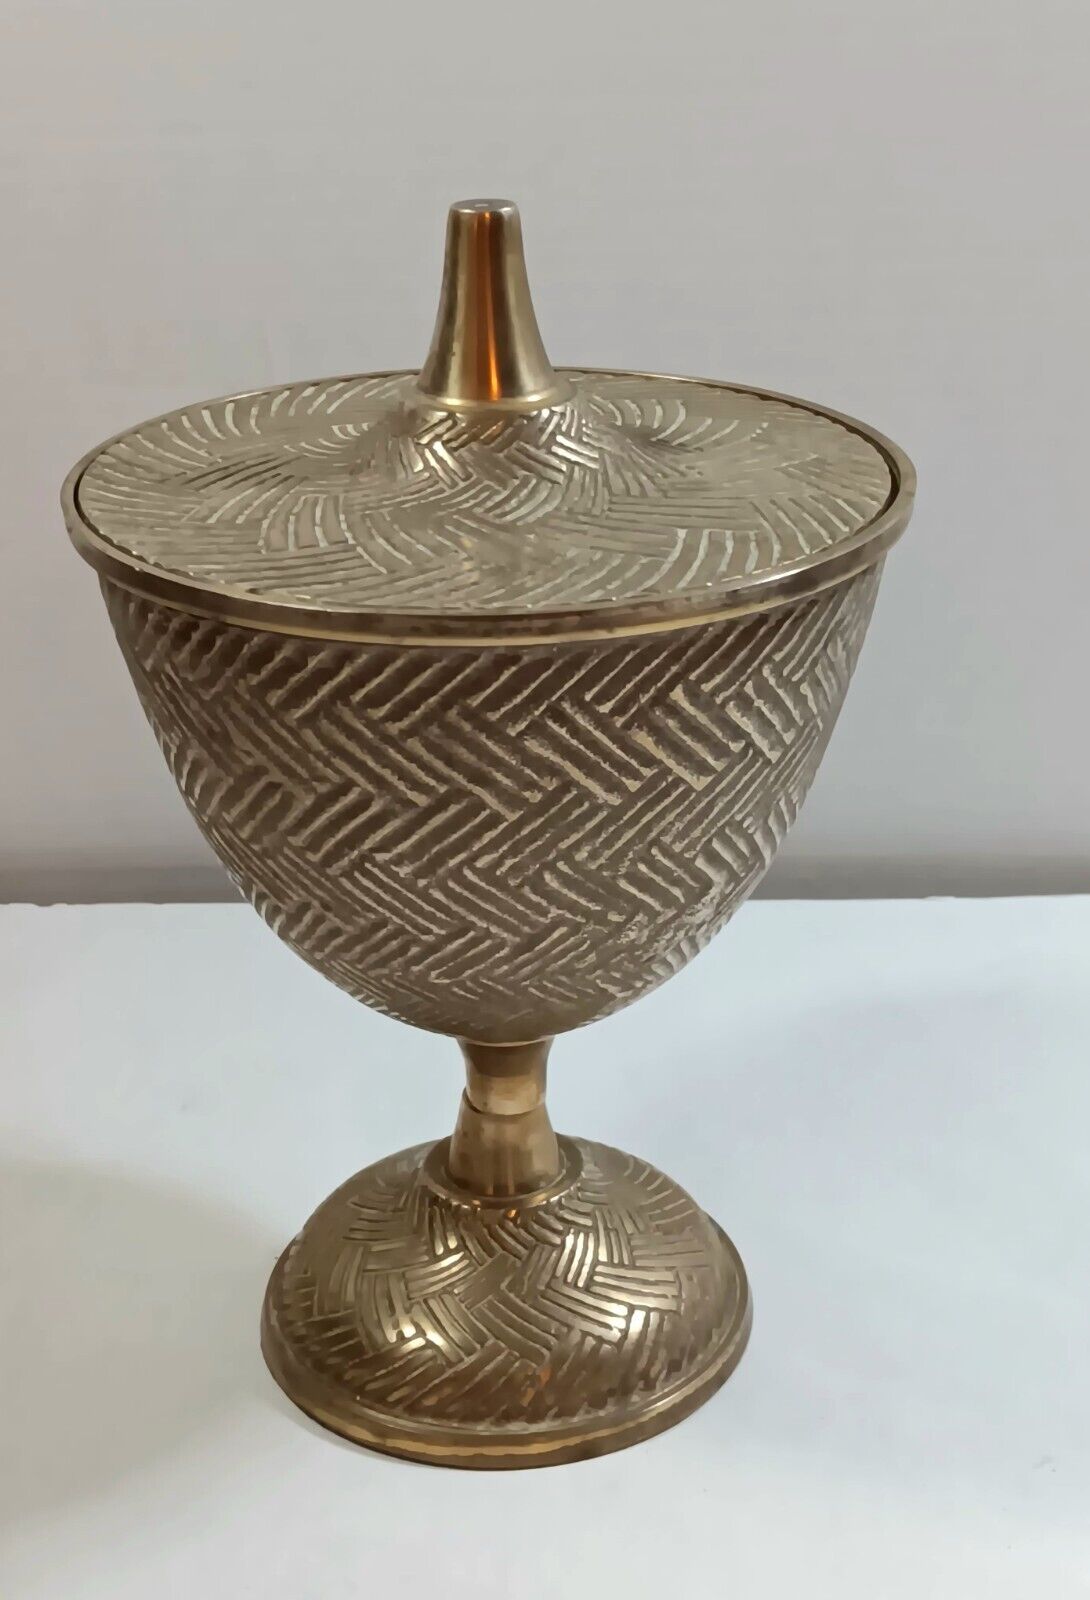 Vtg Bombay Company Basket Weave Etched In Brass Footed Bowl w/Lid Home Decor 